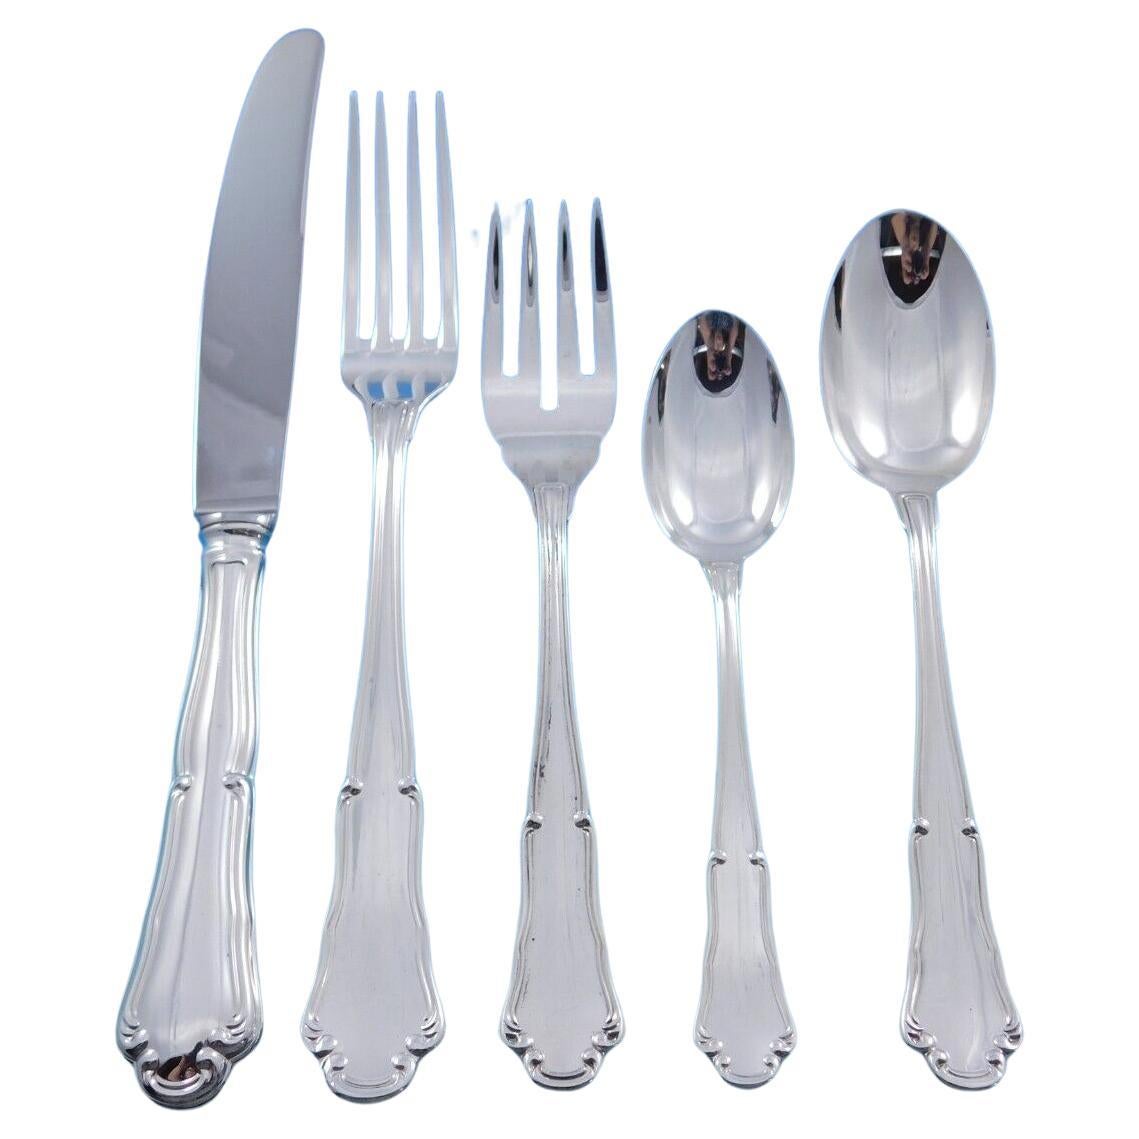 https://a.1stdibscdn.com/barocco-by-wallace-sterling-silver-flatware-set-12-service-66-pc-italy-dinner-for-sale/f_10224/f_372653821701103326420/f_37265382_1701103326731_bg_processed.jpg